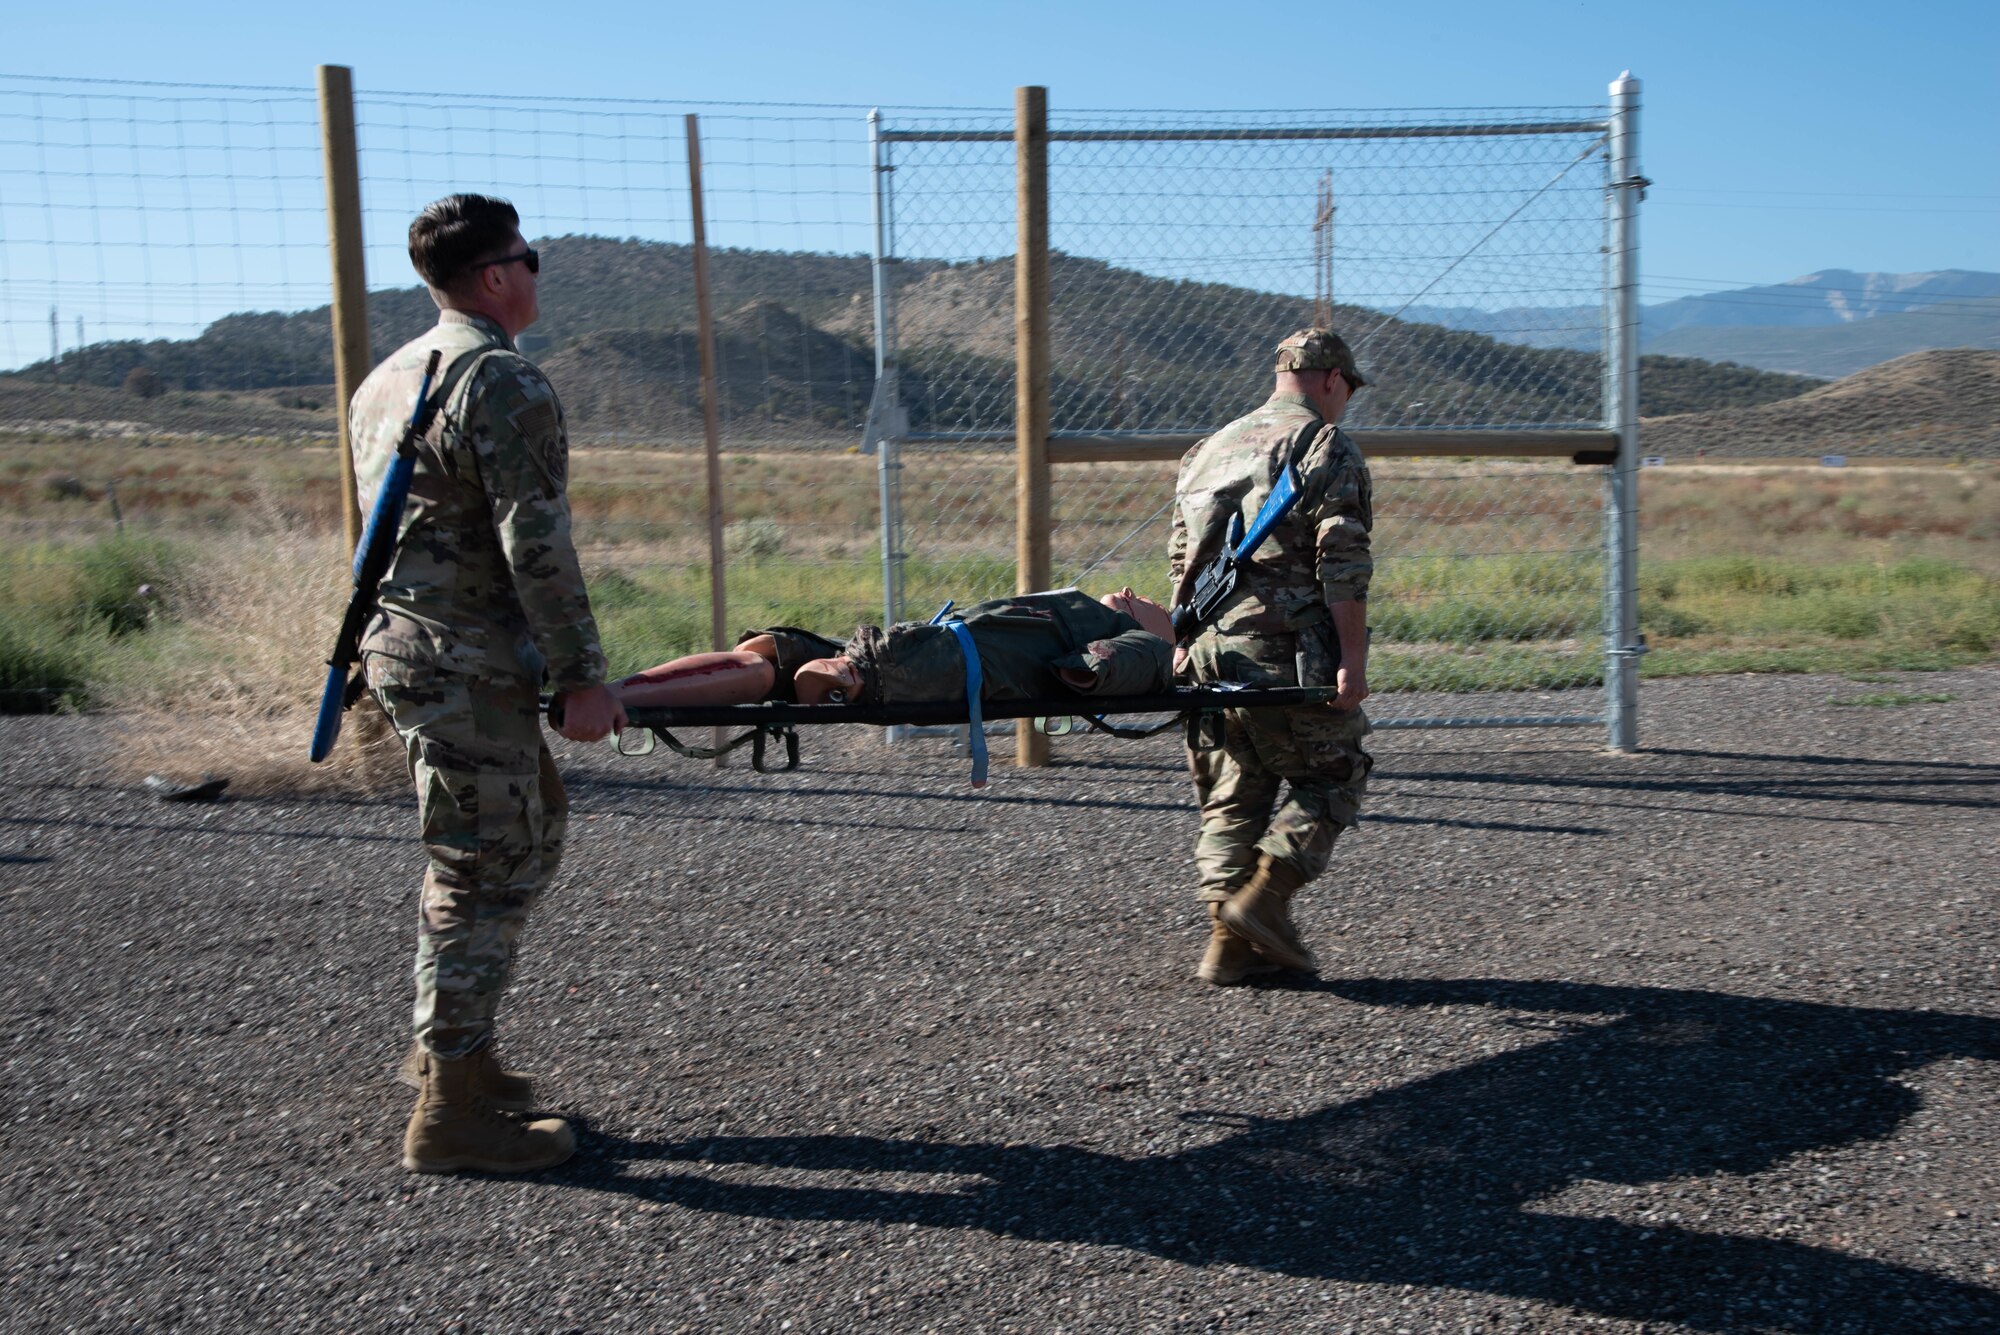 Two Airmen carrying a stretcher with a medical dummy